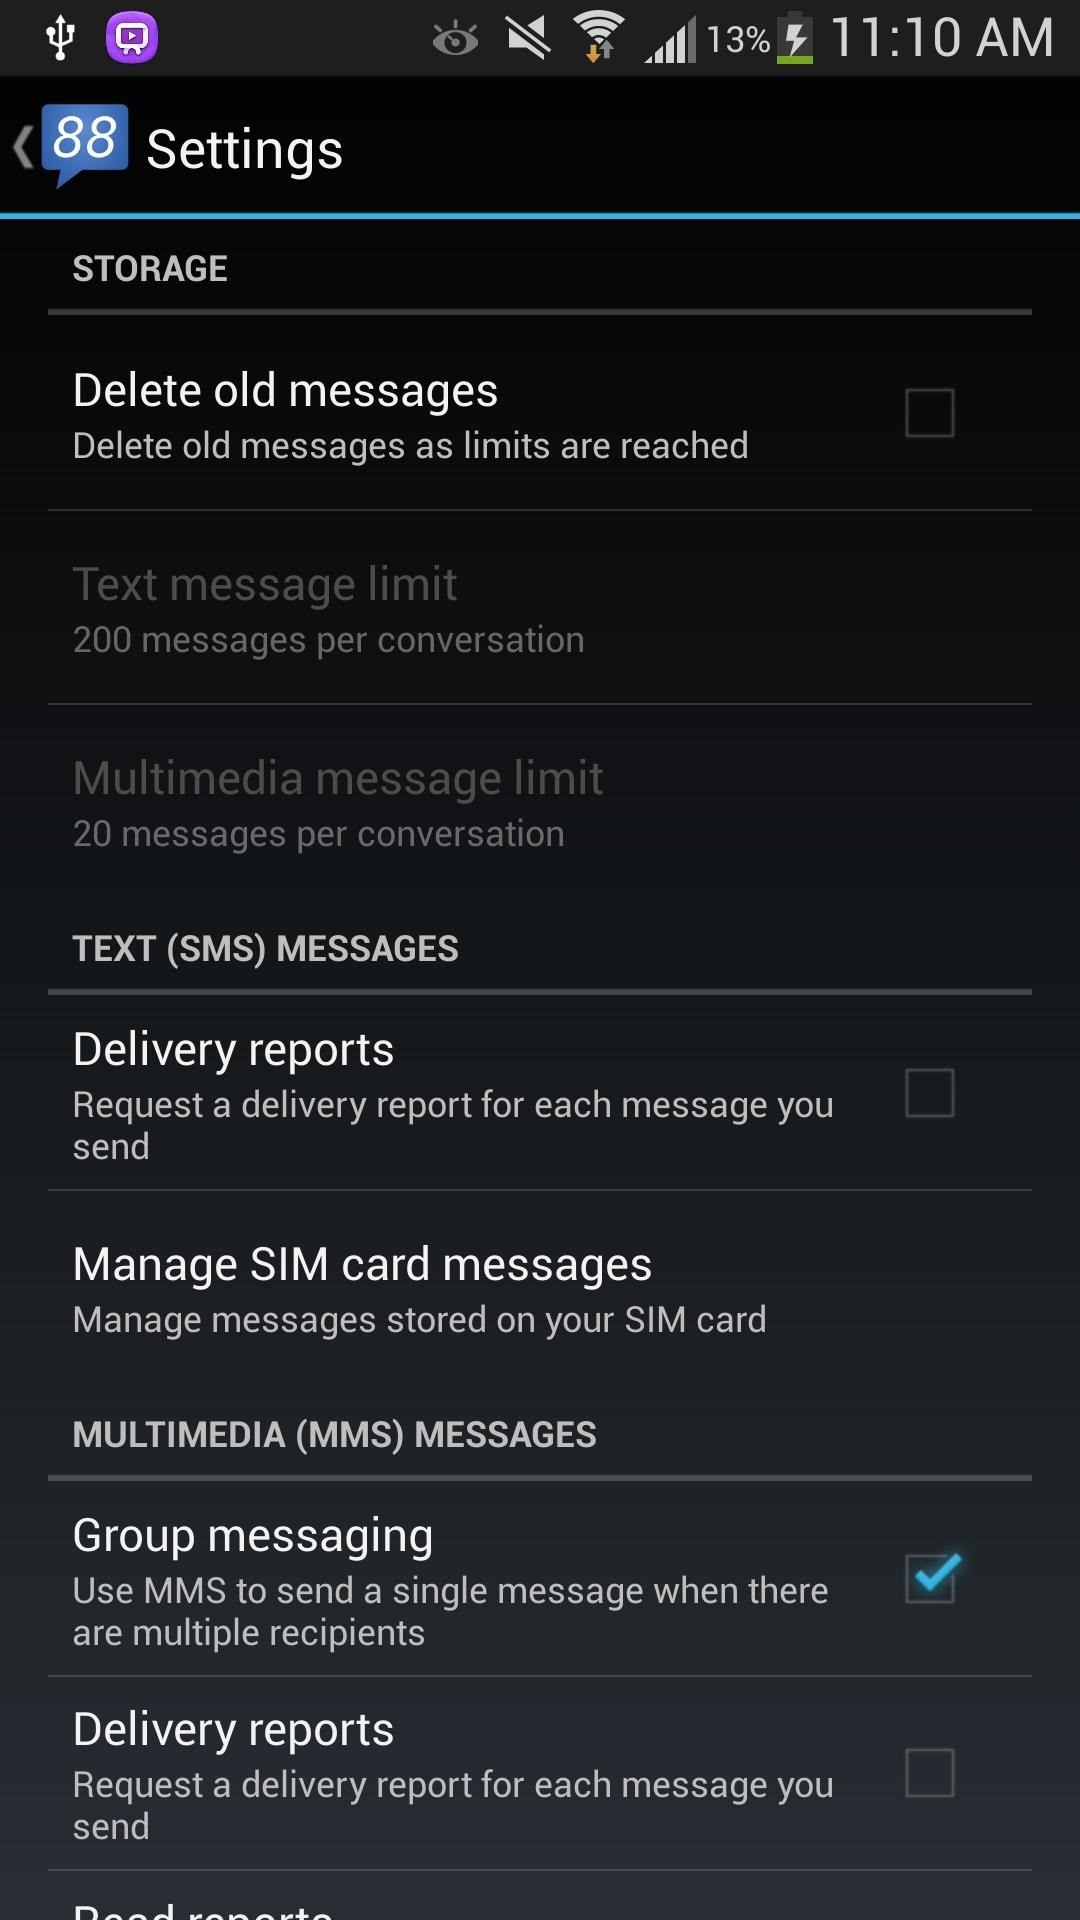 Text Better on Your Samsung Galaxy S4 with This Hybrid Messaging App Based on Android 4.3 & CyanogenMod 10.2